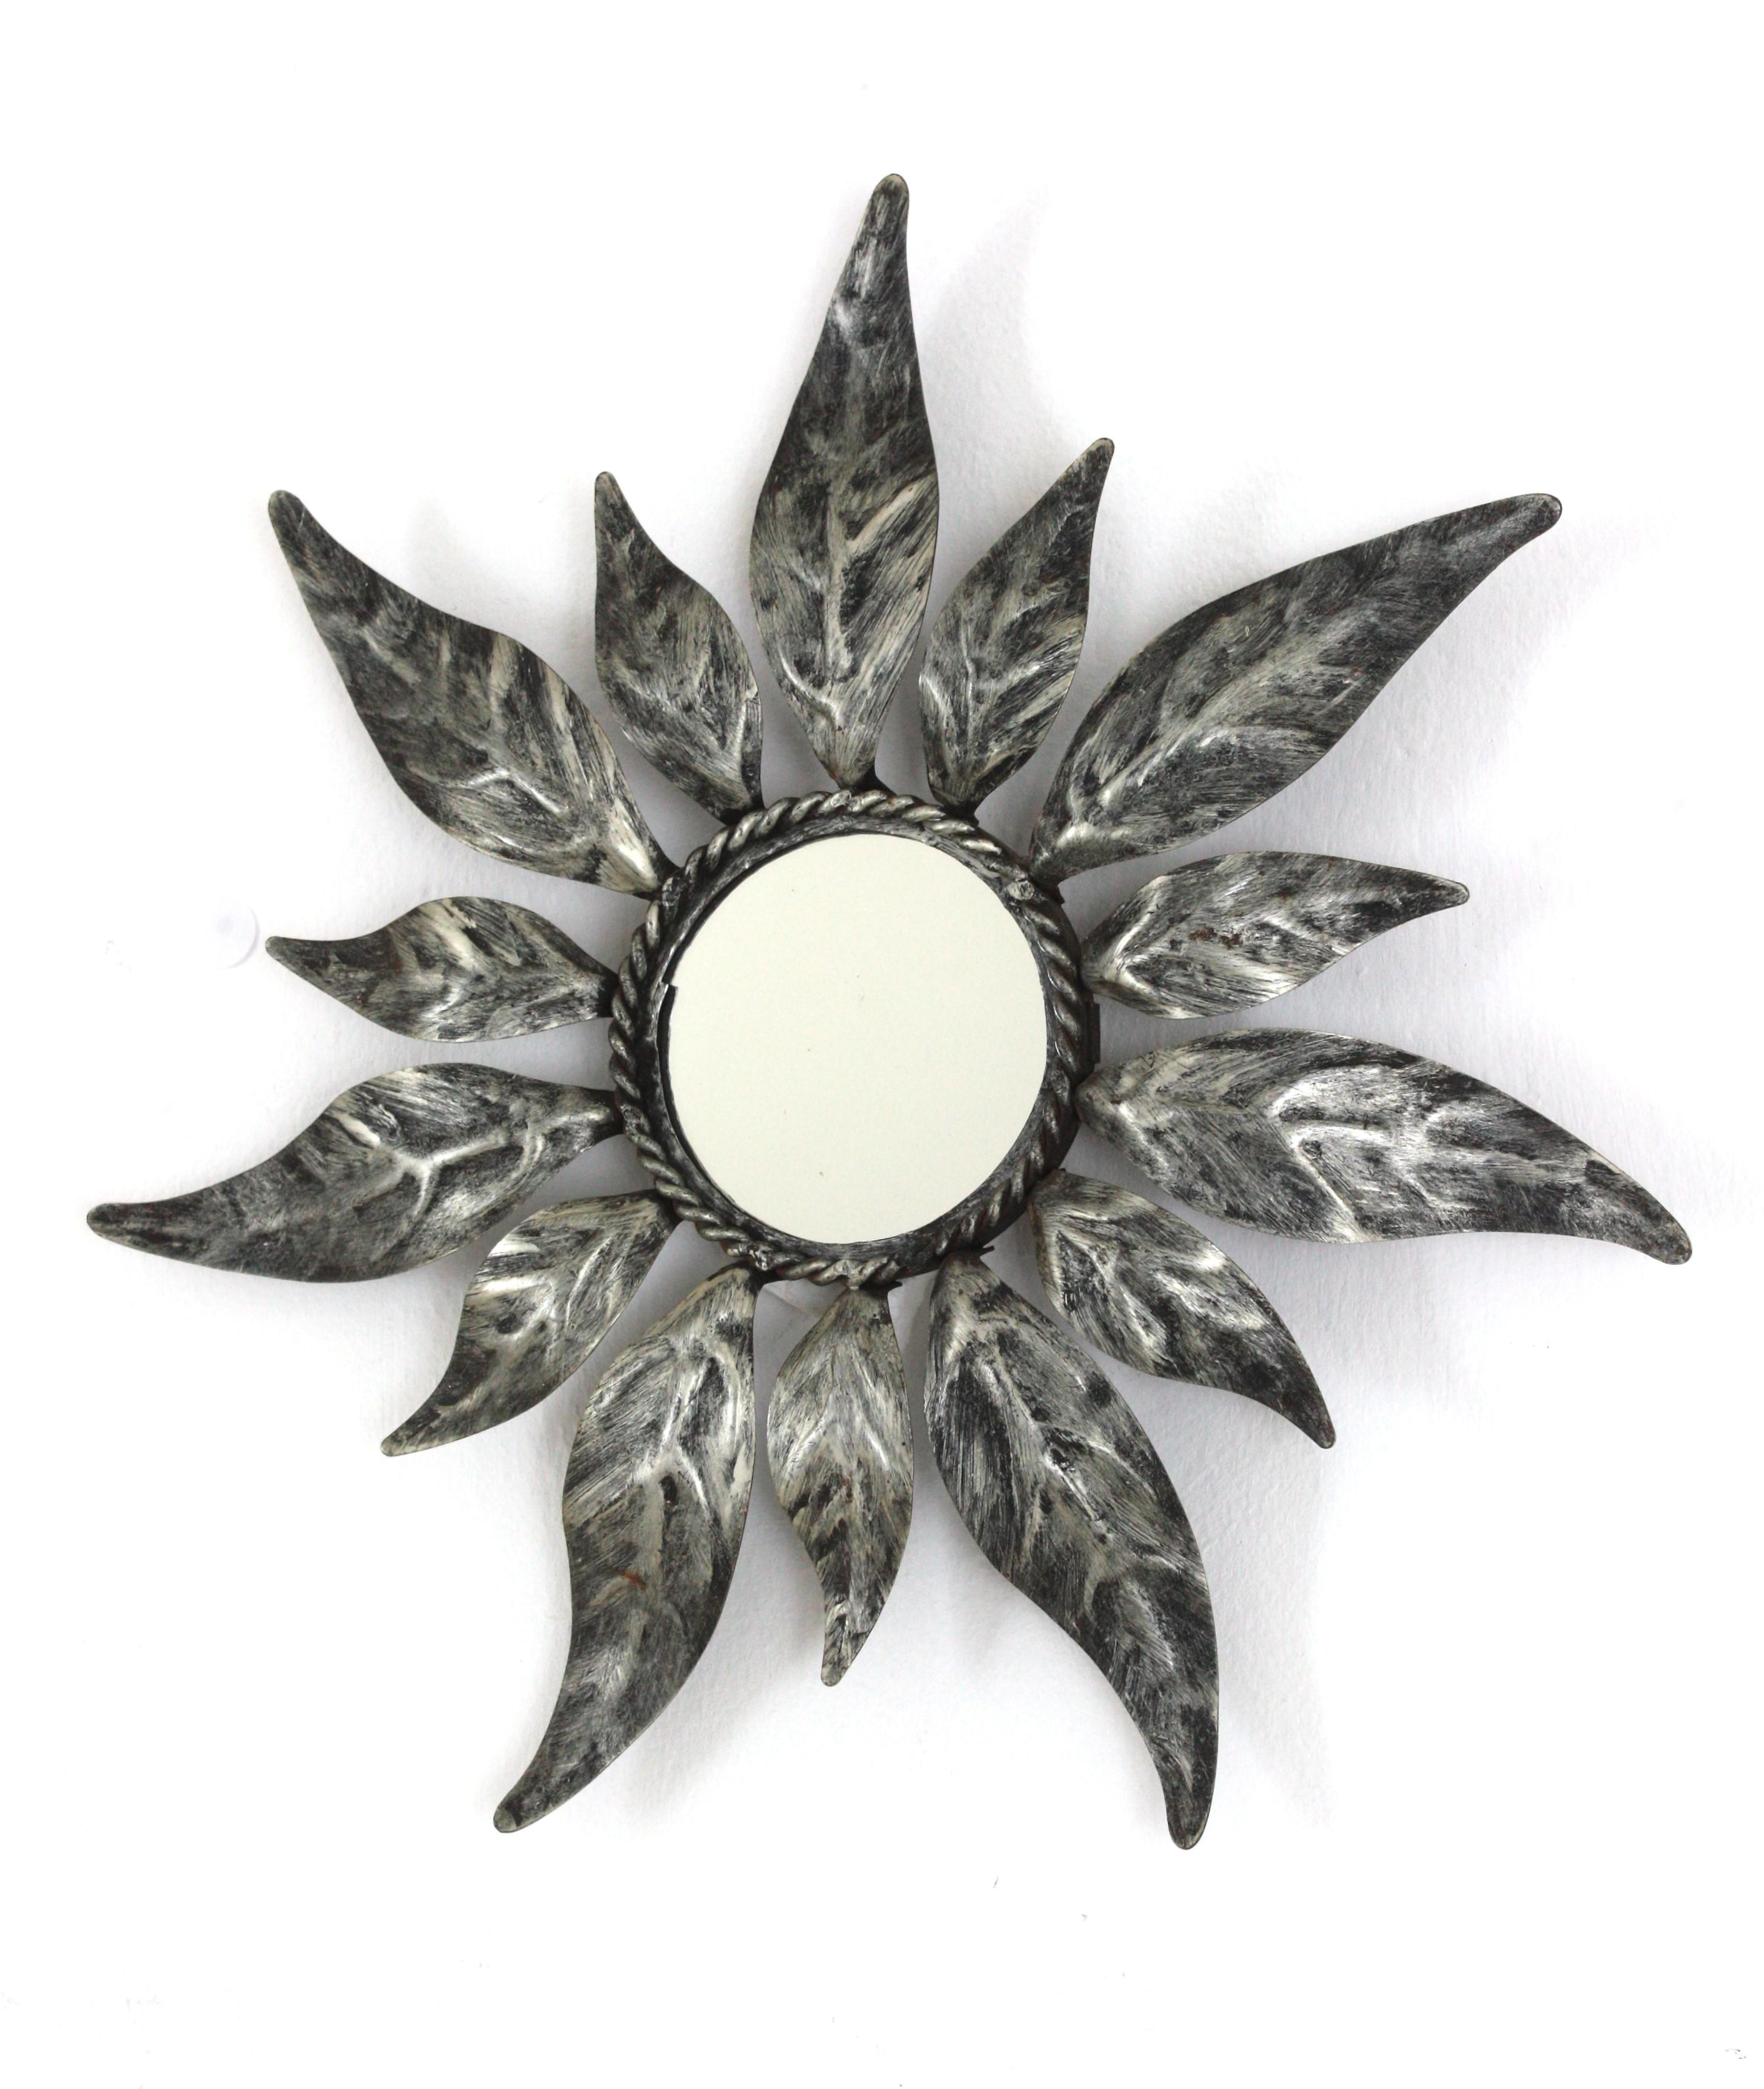 Sunburst Mirror in Silvered Iron, Small Scale, Mid-Century Modern  For Sale 1